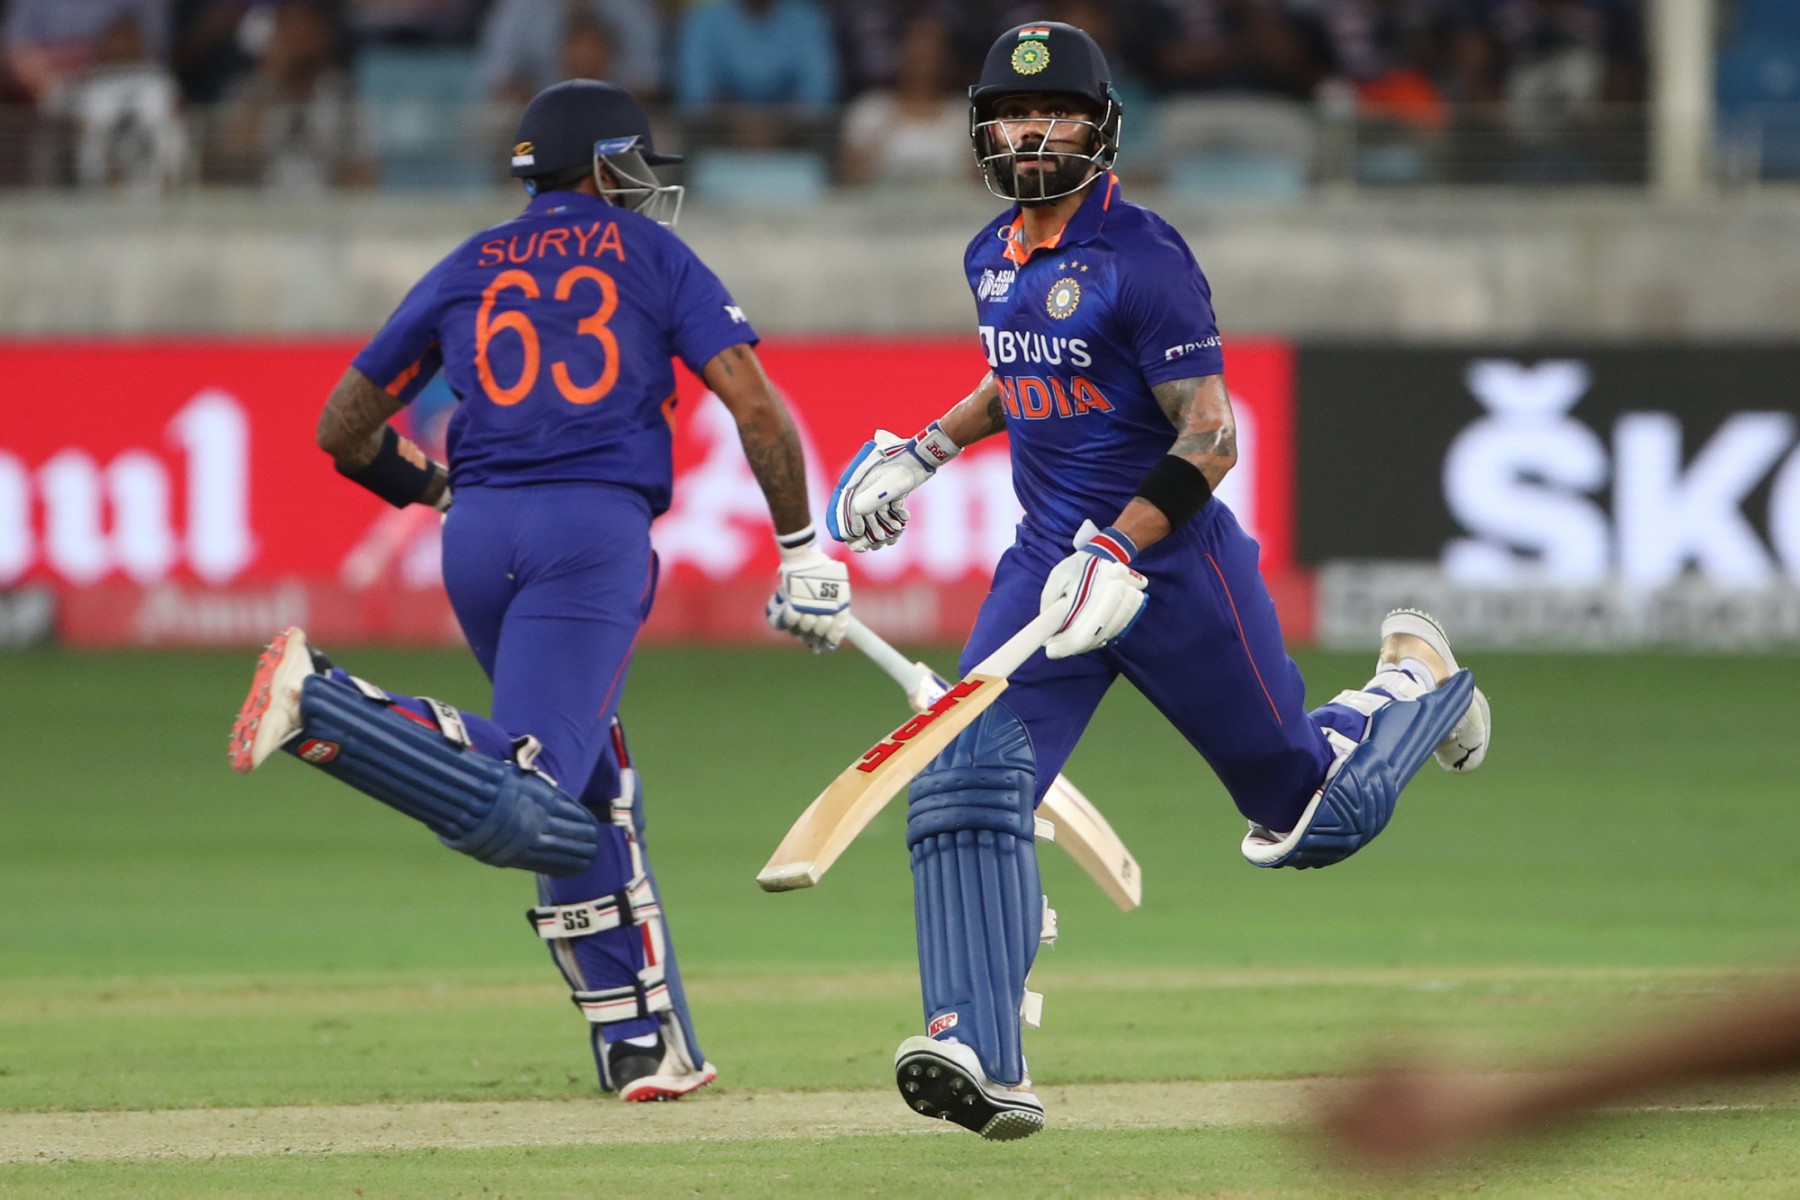 India's aggressive batting approach yields results